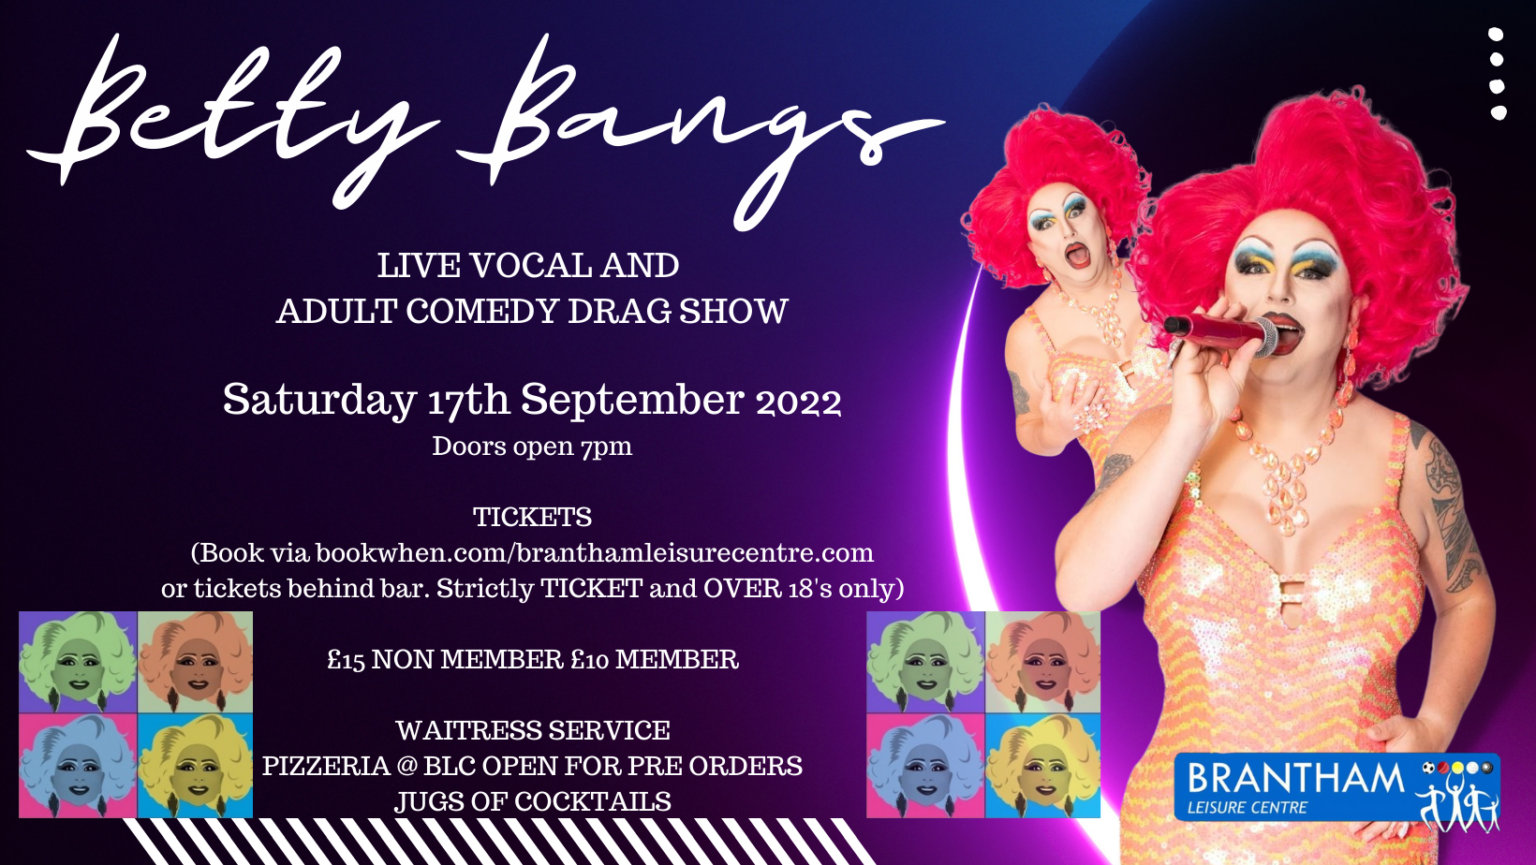 Betty Bangs Live Vocal And Adult Comedy Show Brantham Leisure Centre